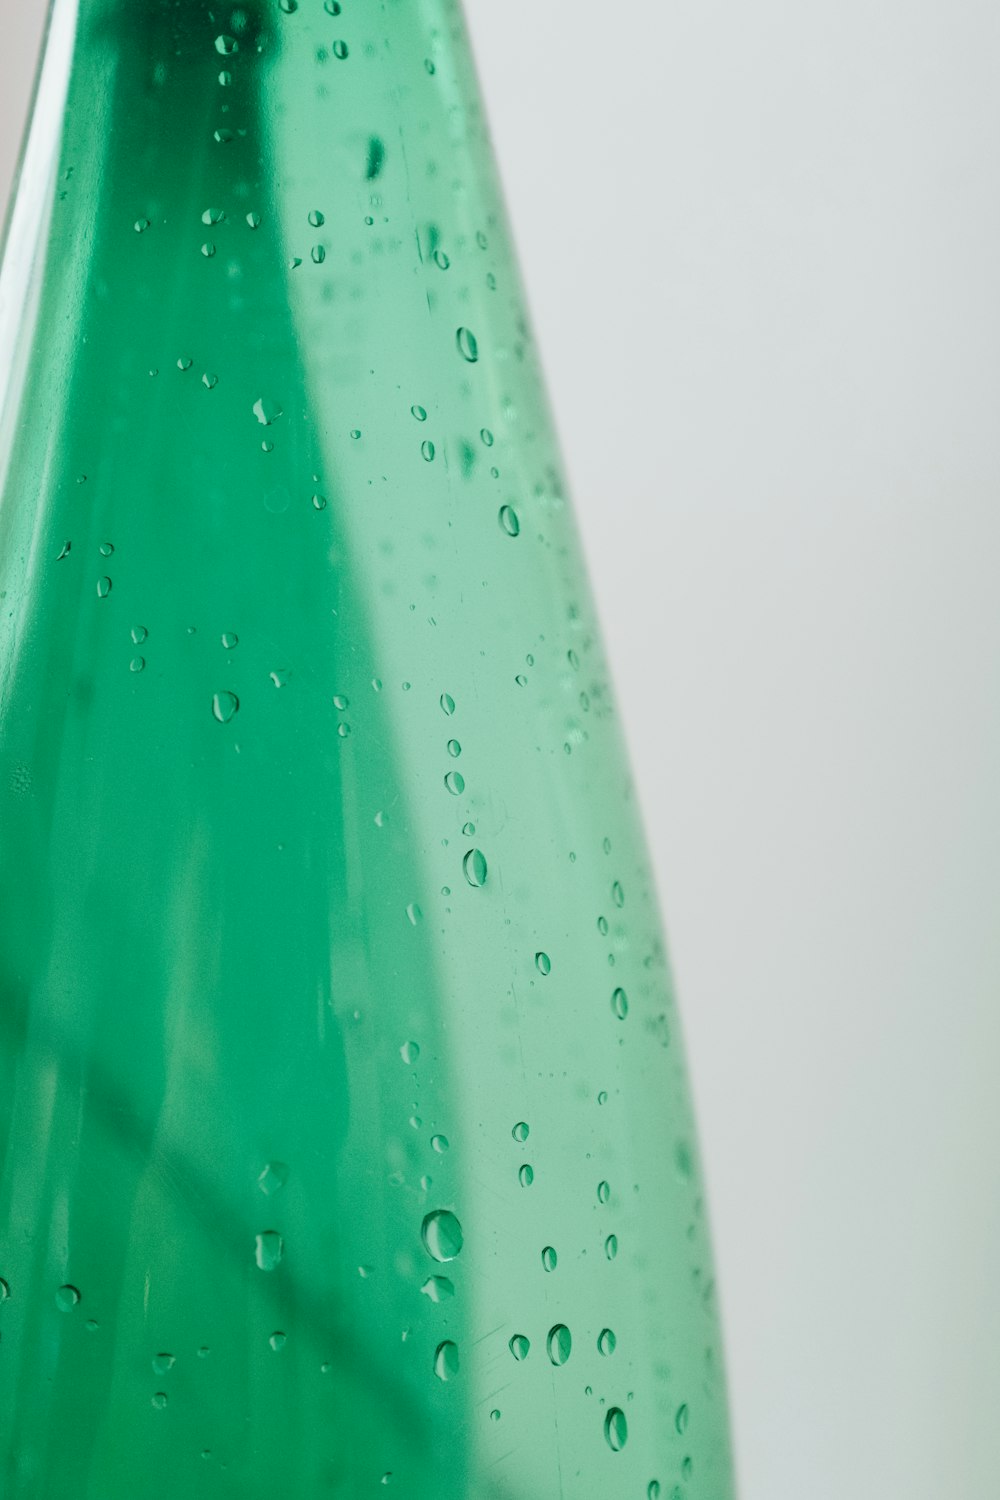 green plastic bottle with water droplets